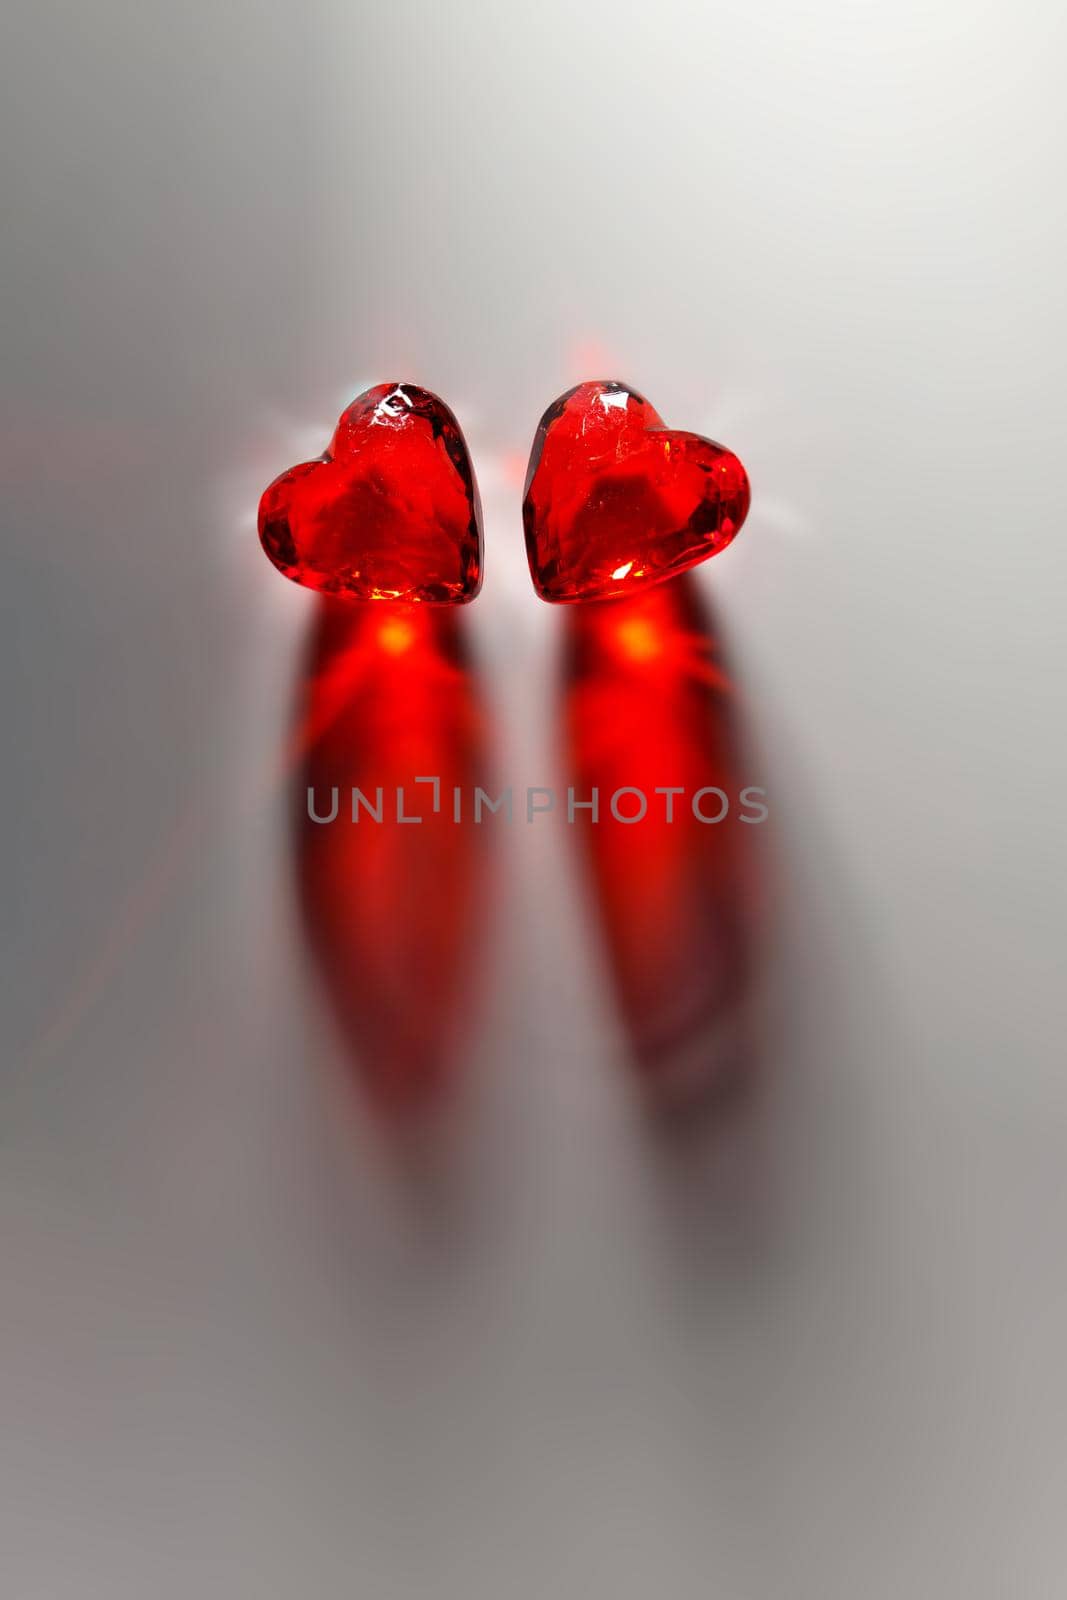 Directly Above Studio mage of Two Sparkling Red Gemstone Hearts, side-by-side, on a Grey Studio Background. This image is dramatically lit and has plenty of Copy Space.